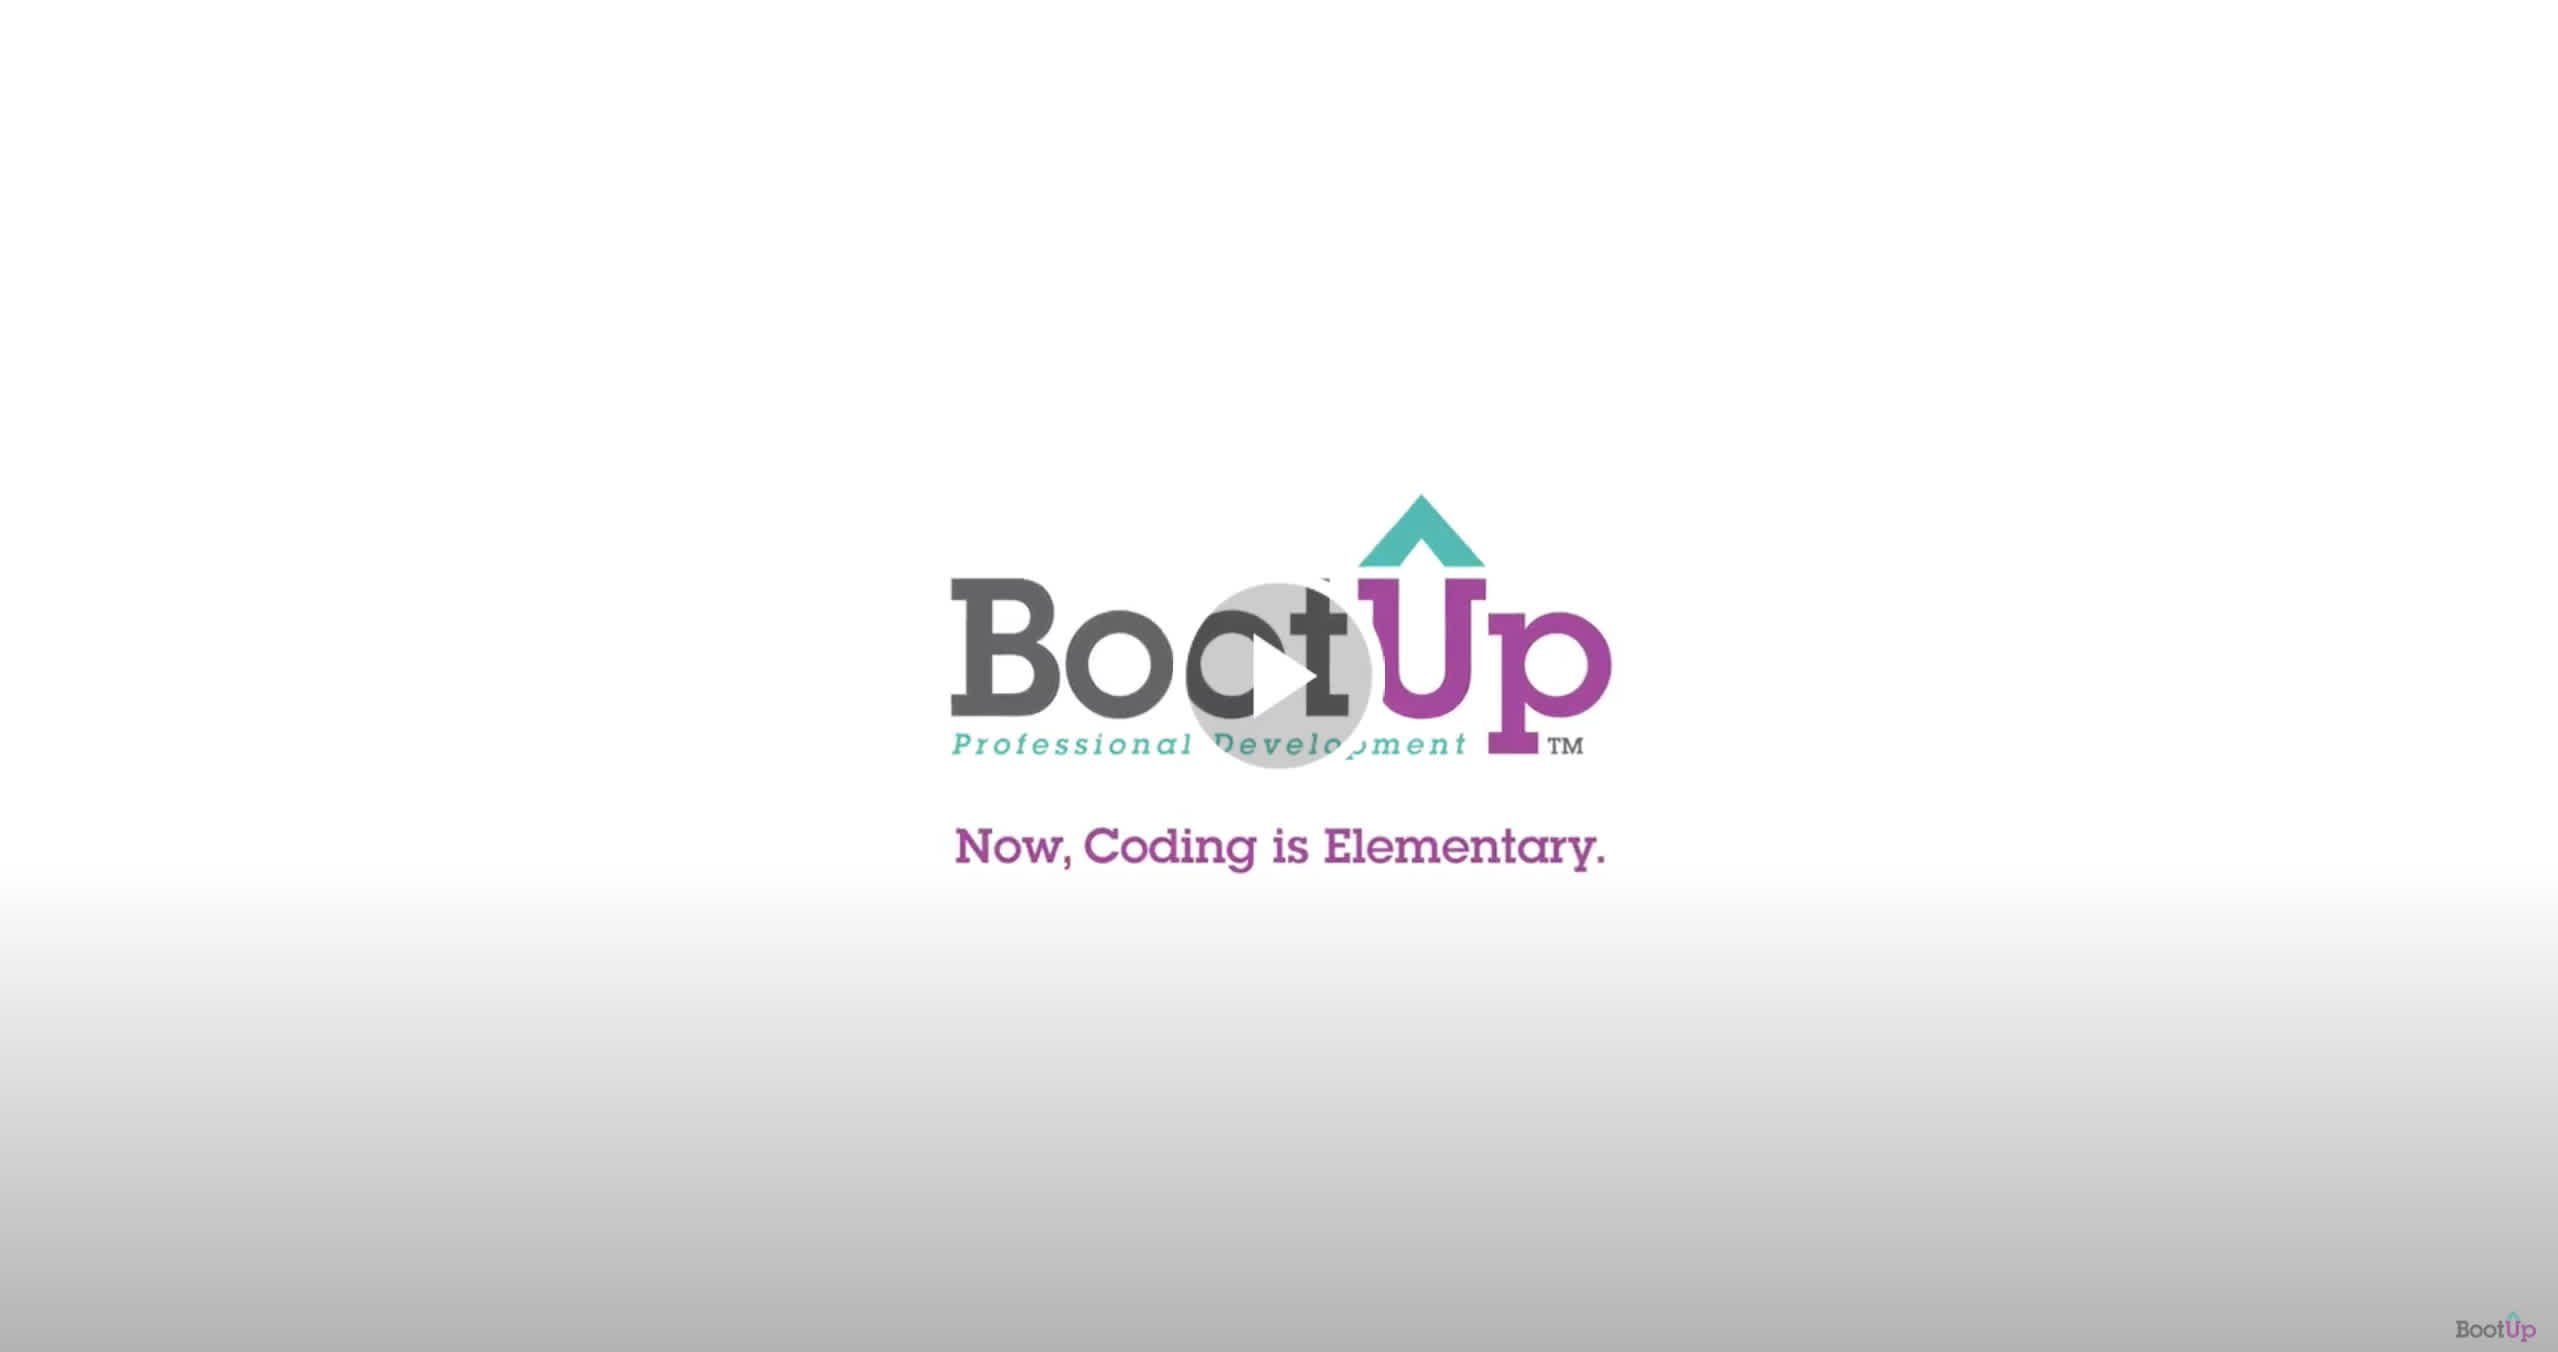 Intro to BootUp